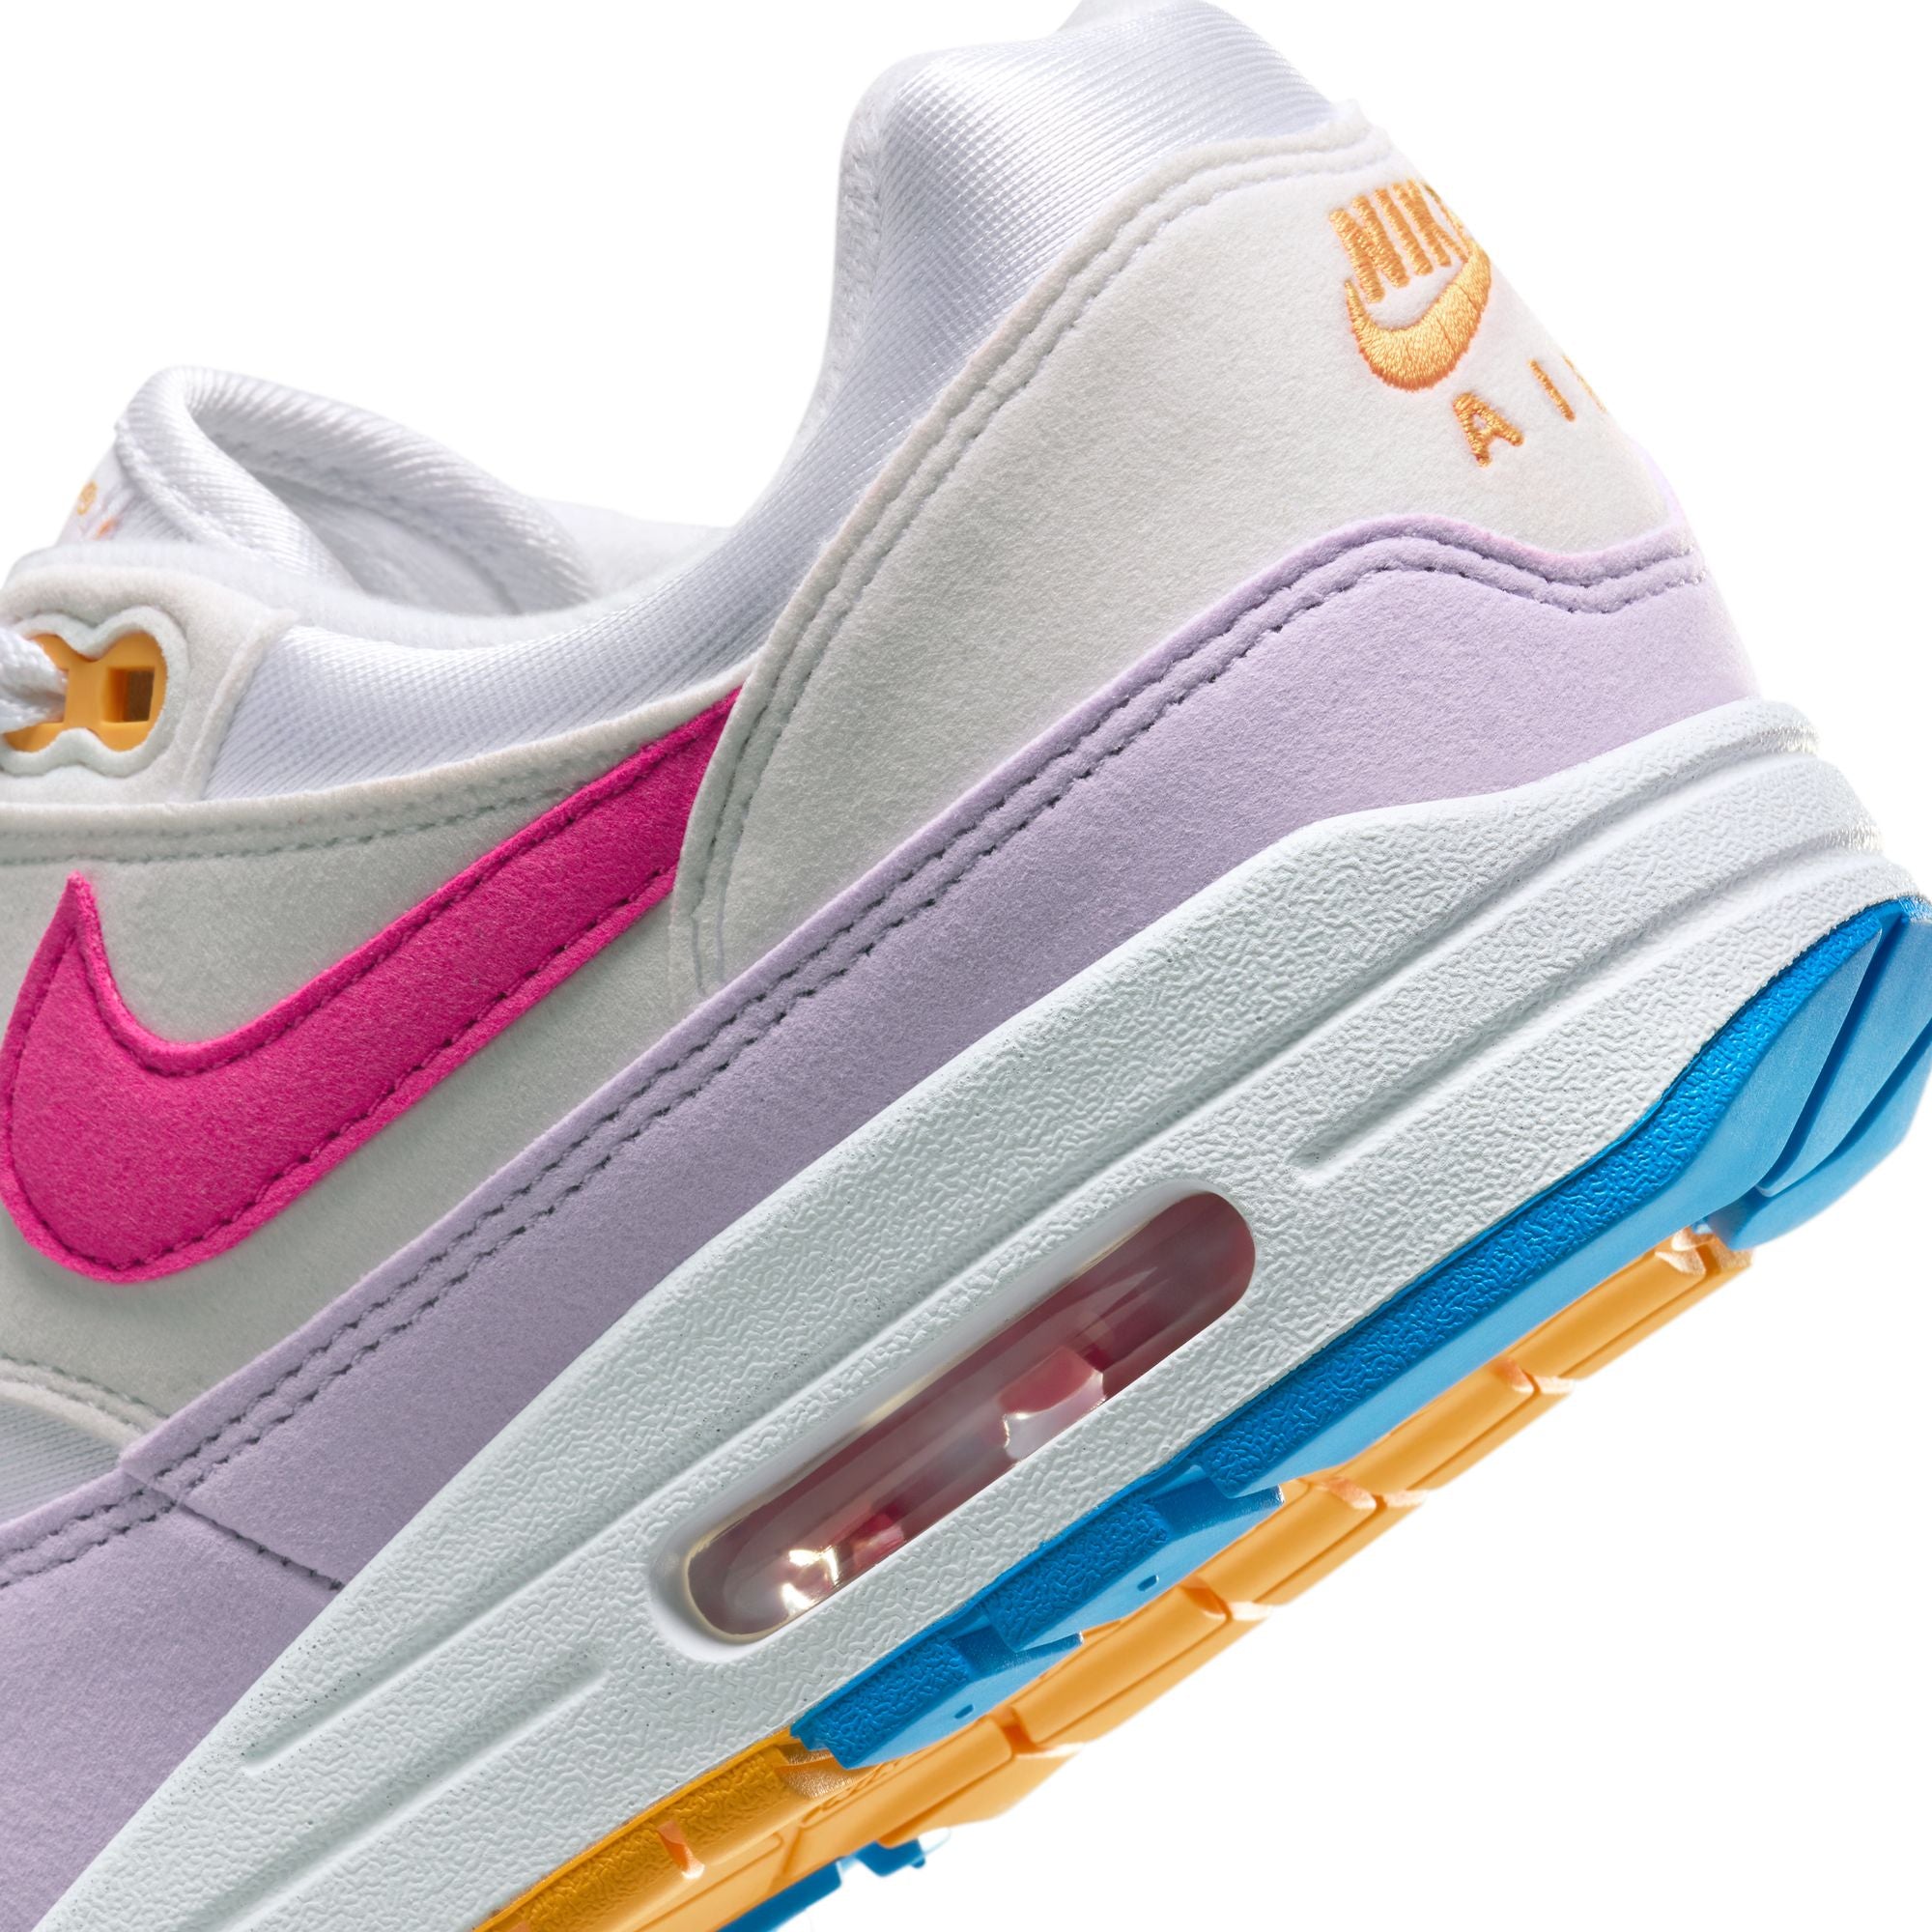 Women's Nike Air Max 1 '87 'Alchemy Pink'